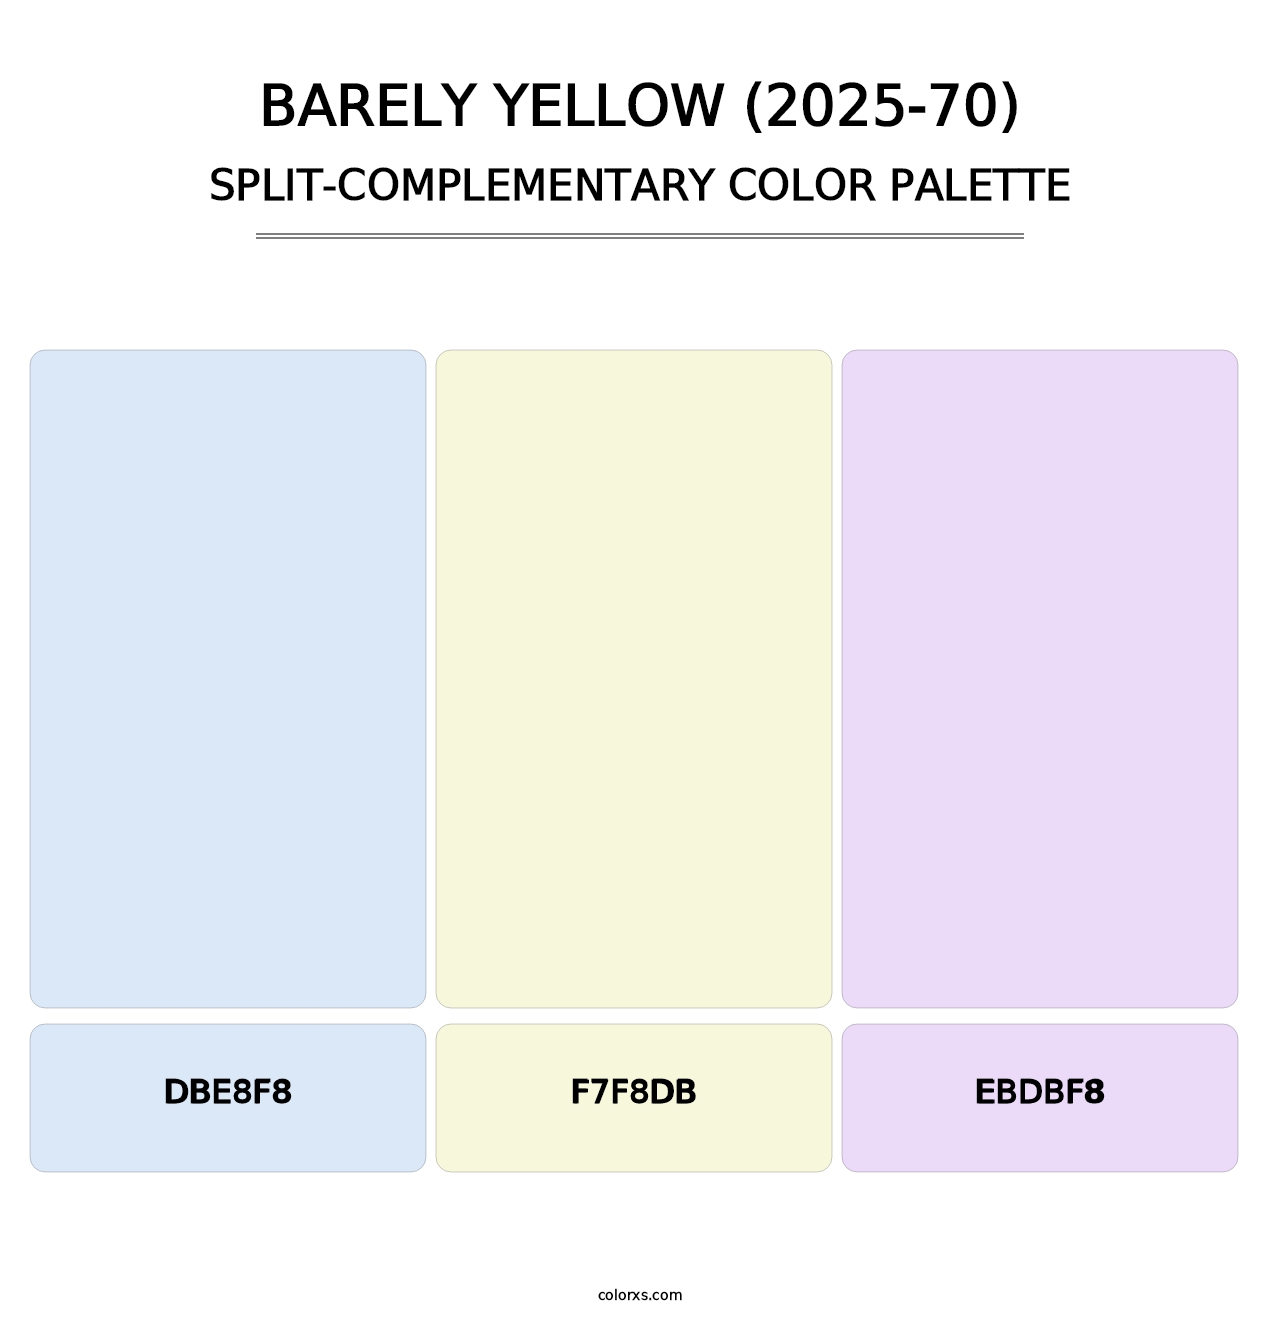 Barely Yellow (2025-70) - Split-Complementary Color Palette